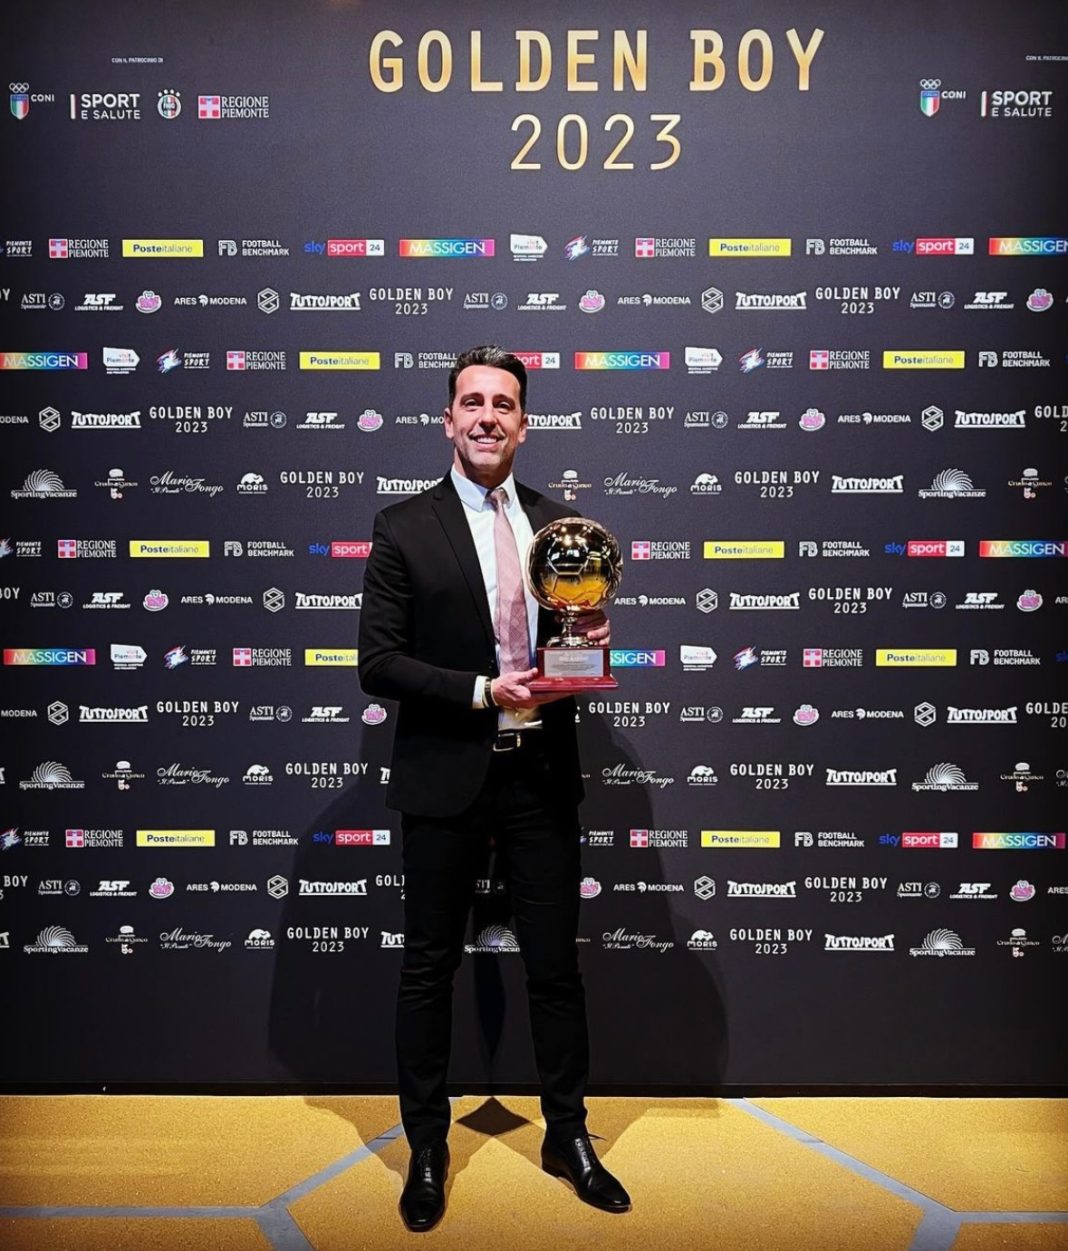 Edu Gaspar with the Best Director award at the Golden Boy 2023 ceremony (Photo via Fabrizio Romano on Twitter)